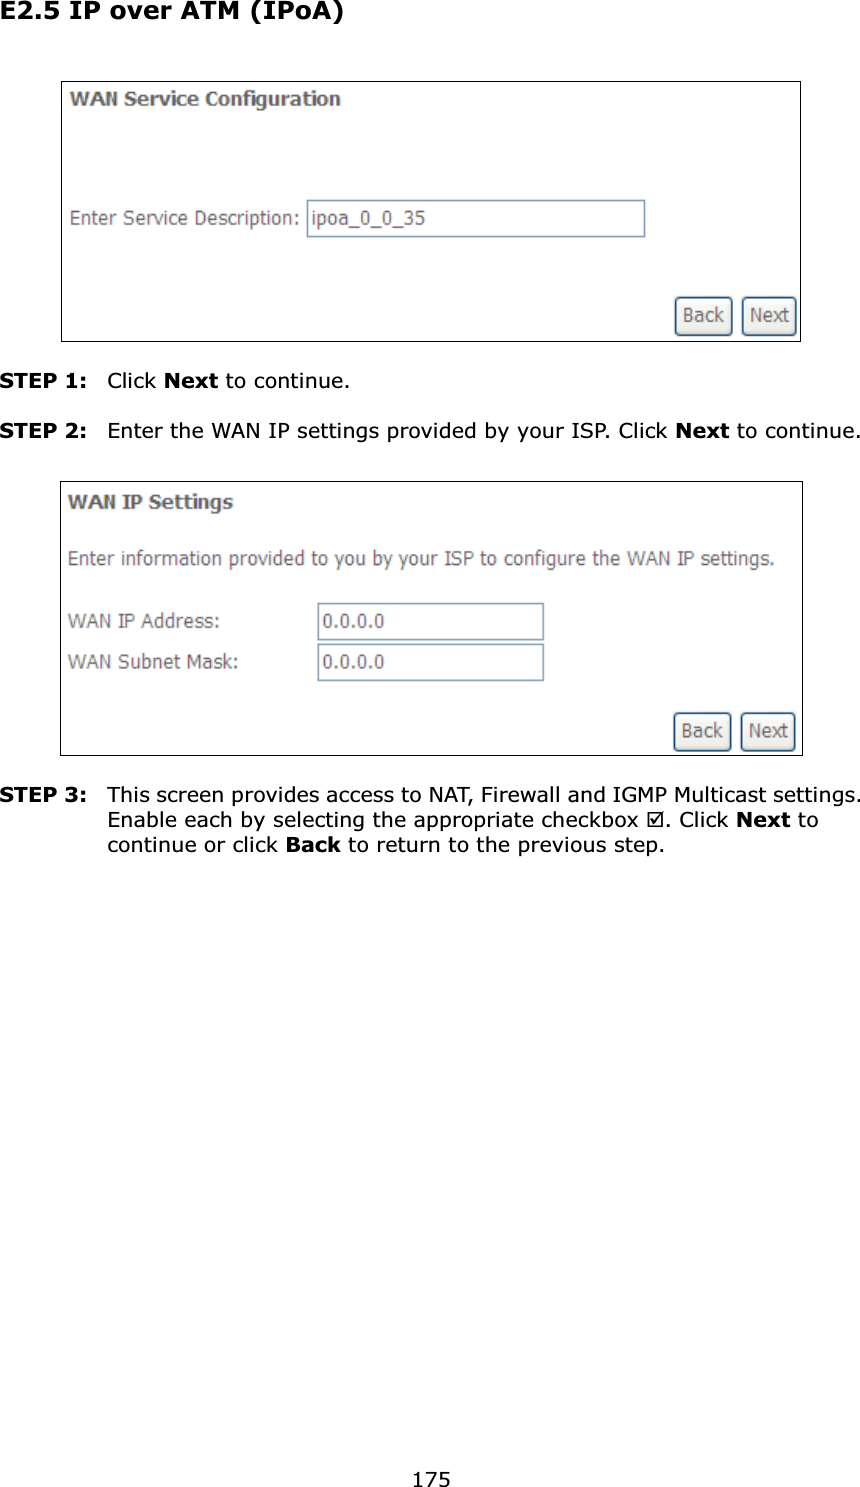  175E2.5 IP over ATM (IPoA)    STEP 1:  Click Next to continue.  STEP 2:  Enter the WAN IP settings provided by your ISP. Click Next to continue.    STEP 3:  This screen provides access to NAT, Firewall and IGMP Multicast settings. Enable each by selecting the appropriate checkbox . Click Next to continue or click Back to return to the previous step.  